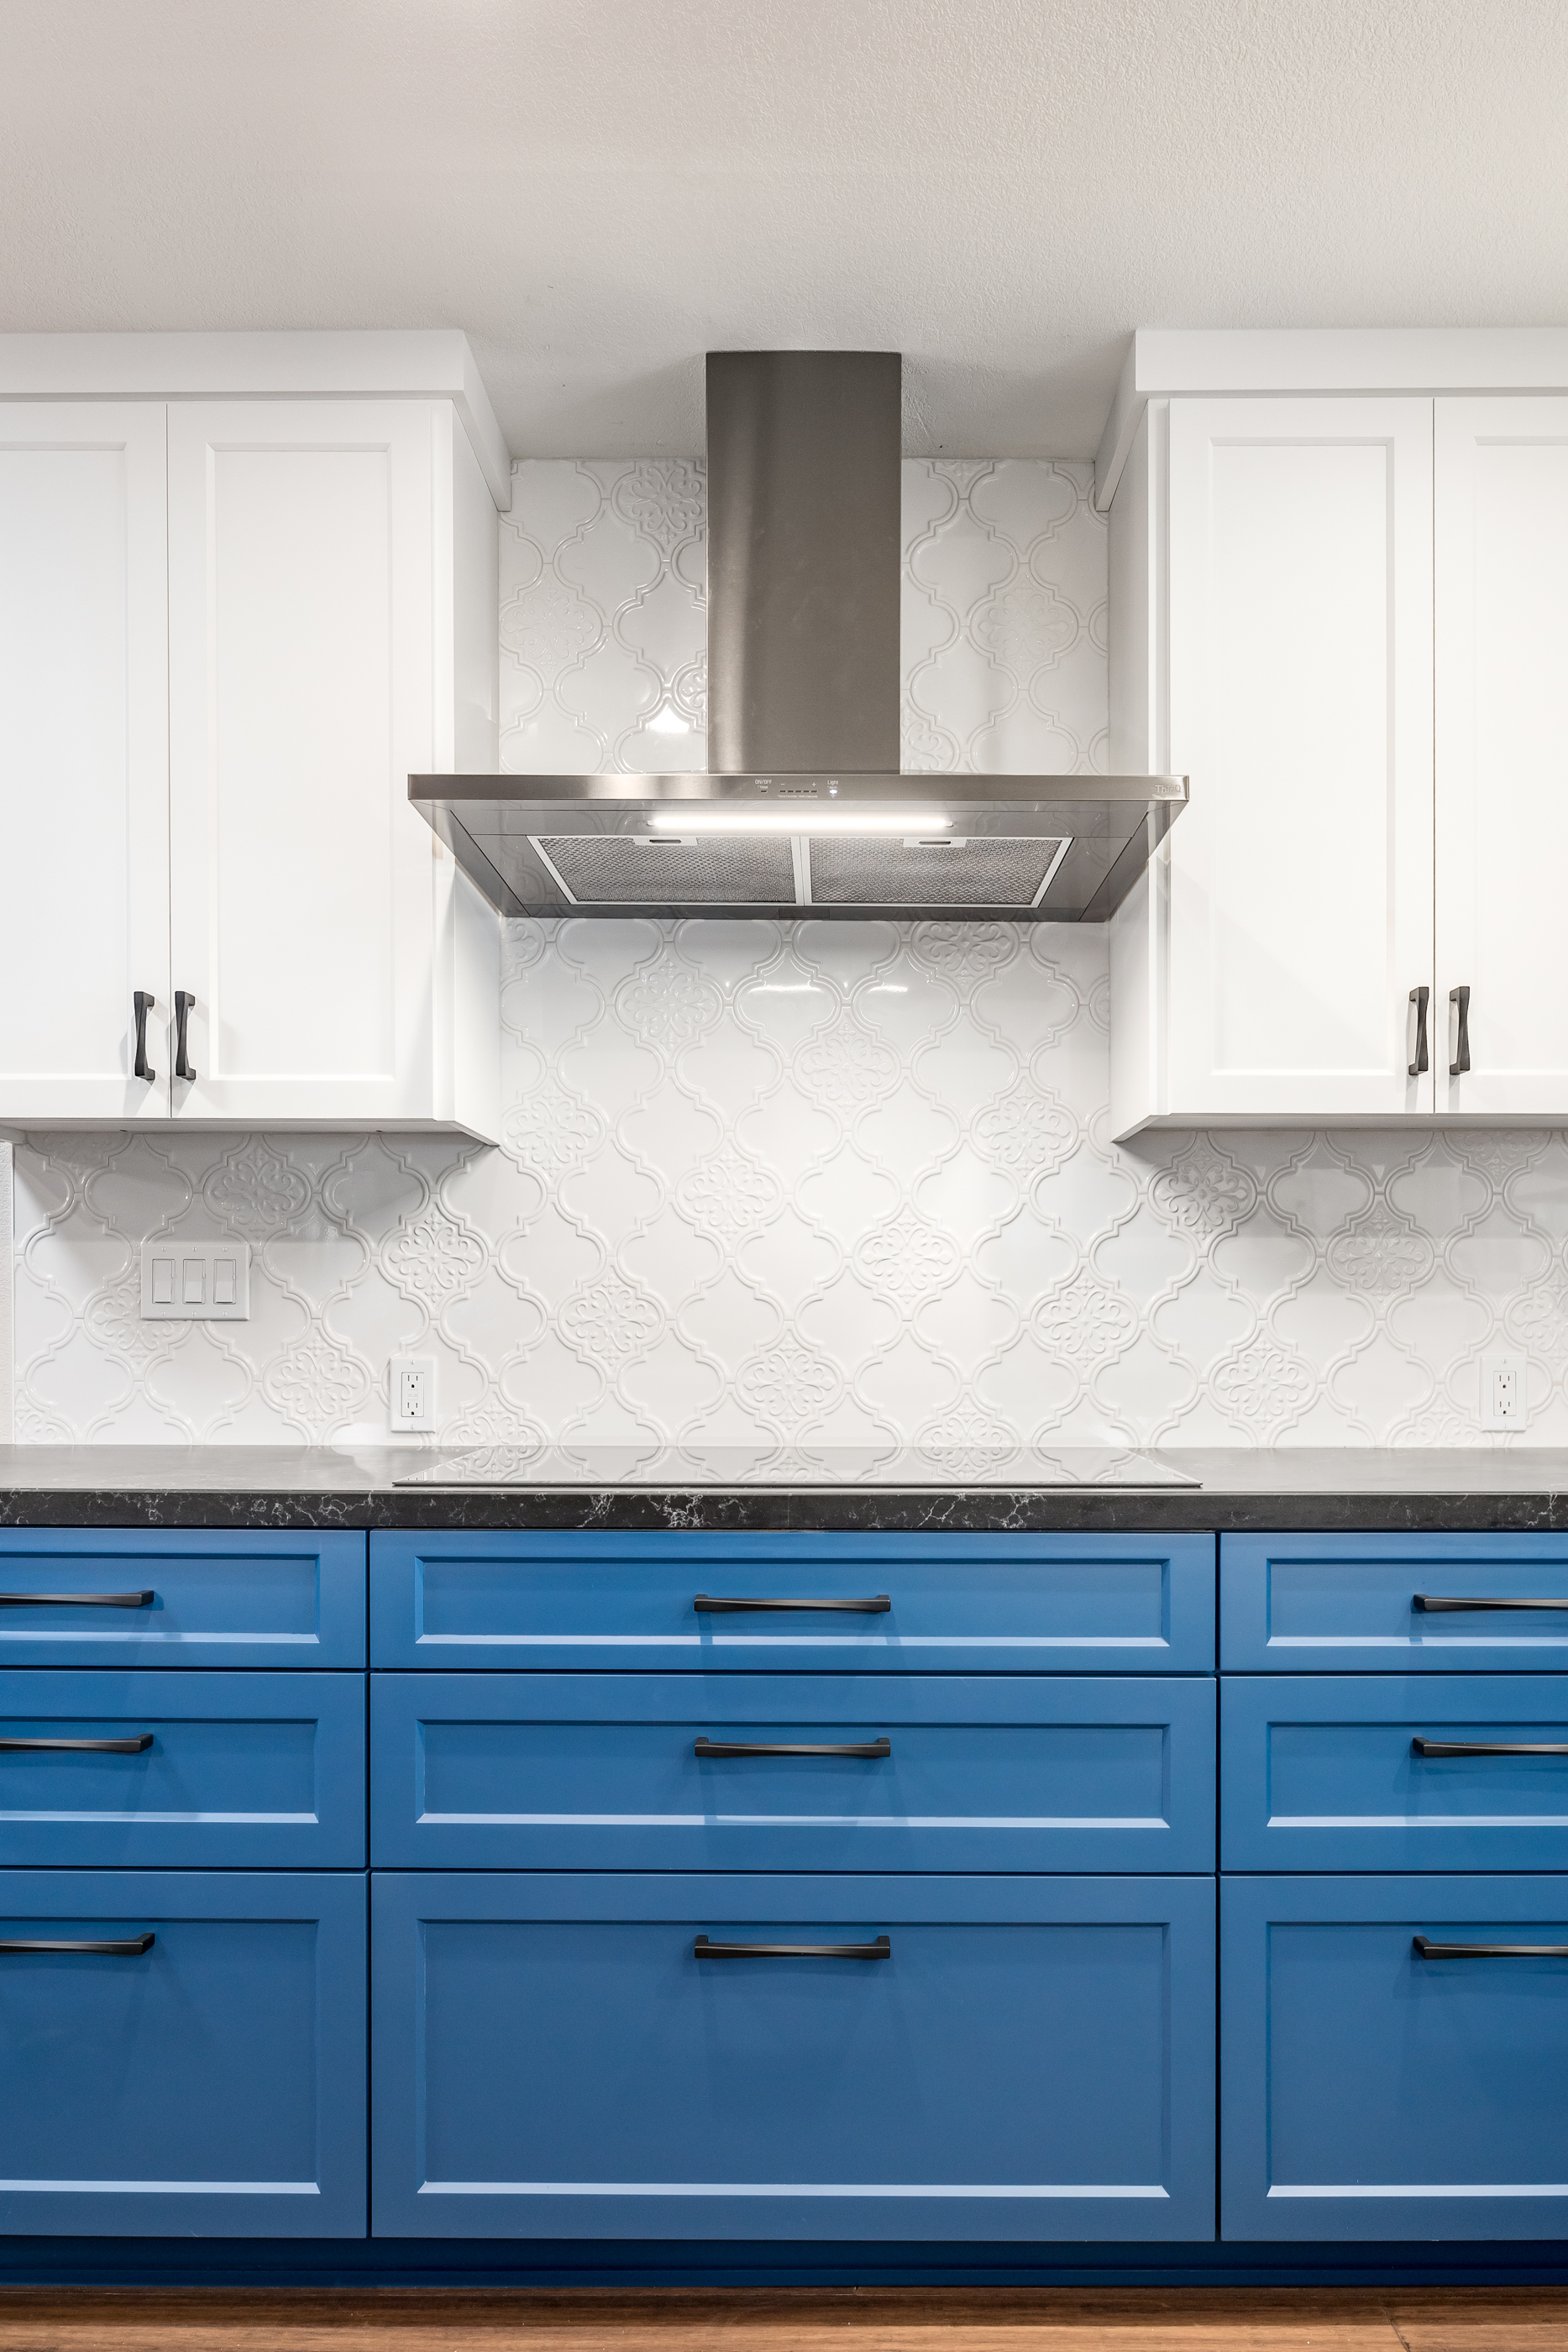 Transform Your Kitchen with Diamond Group Builders: San Jose's Premier Home Remodeling Experts